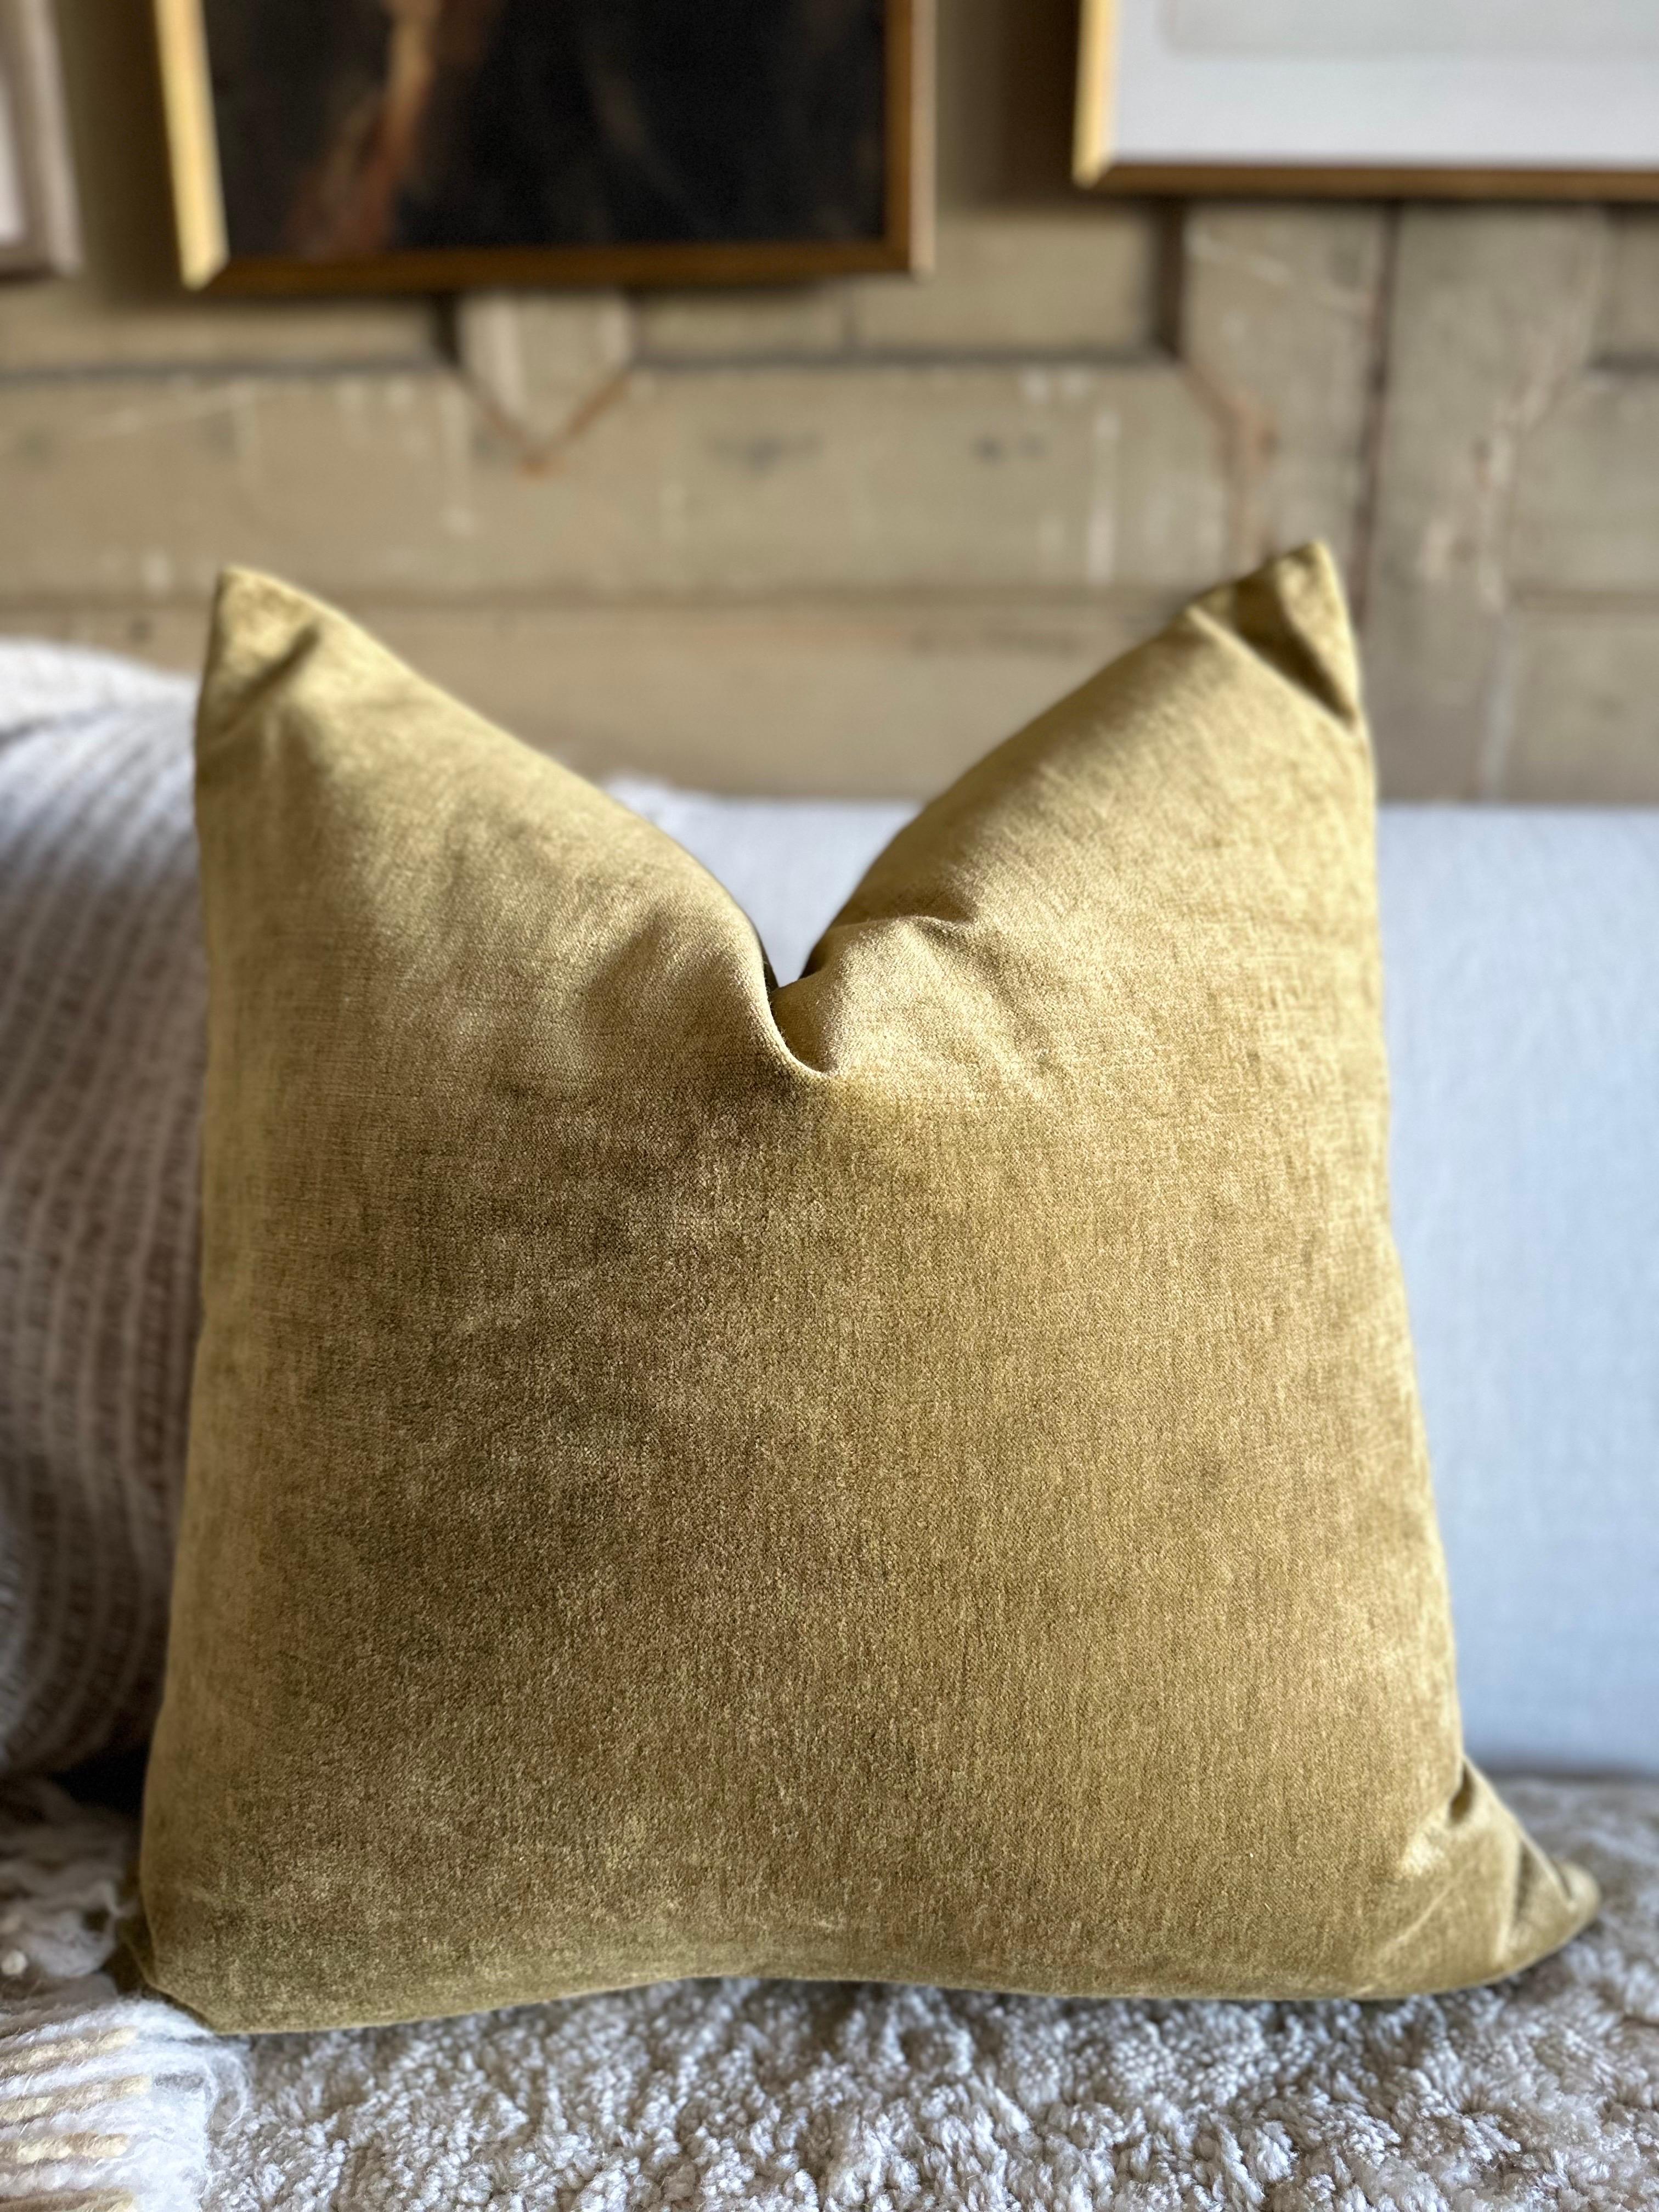 A luxurious Royal Velvet face with stone washed linen back.
Linen & Velvet fabric is imported from France.
Custom made to order, can be customized to your size.
Color: Ocre 
Antique brass zipper
Size 22x22
Includes Down Feather Insert
Care: Can be